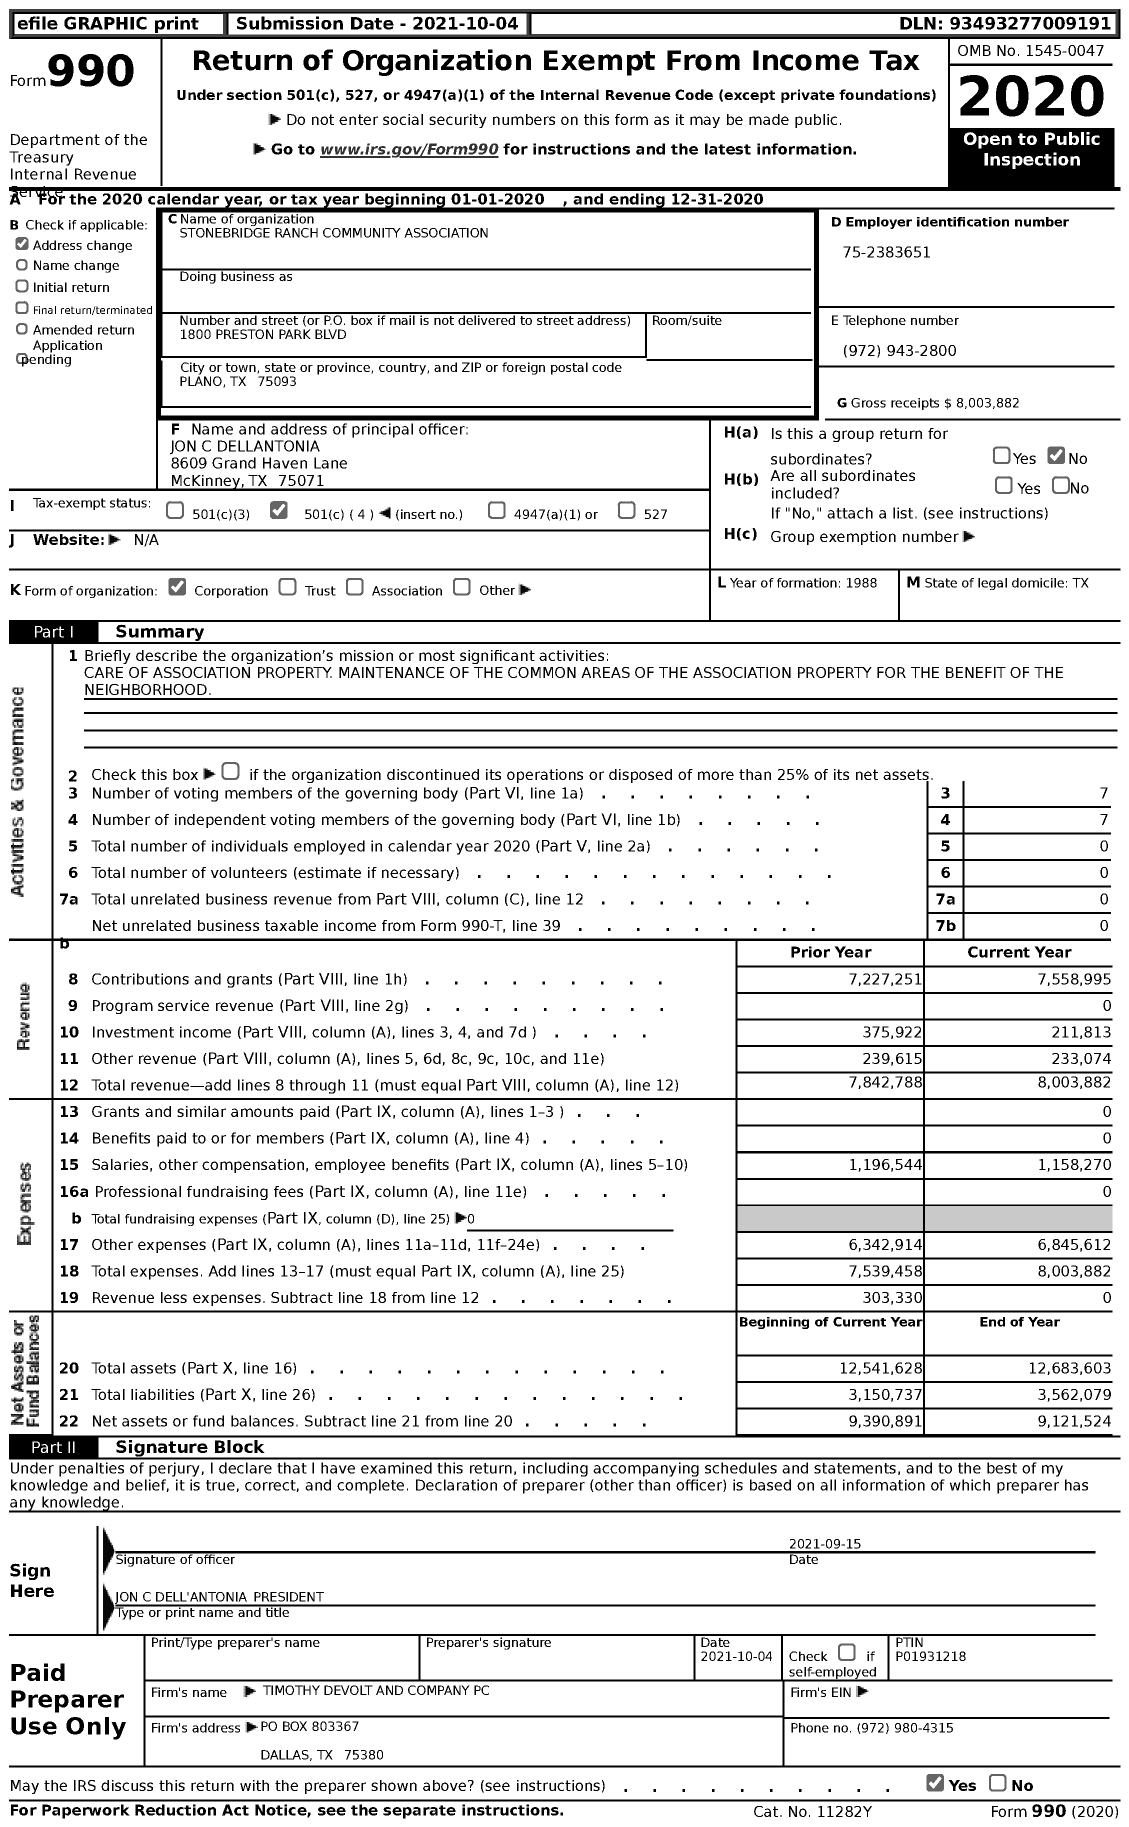 Image of first page of 2020 Form 990 for Stonebridge Ranch Community Association (SRCA)